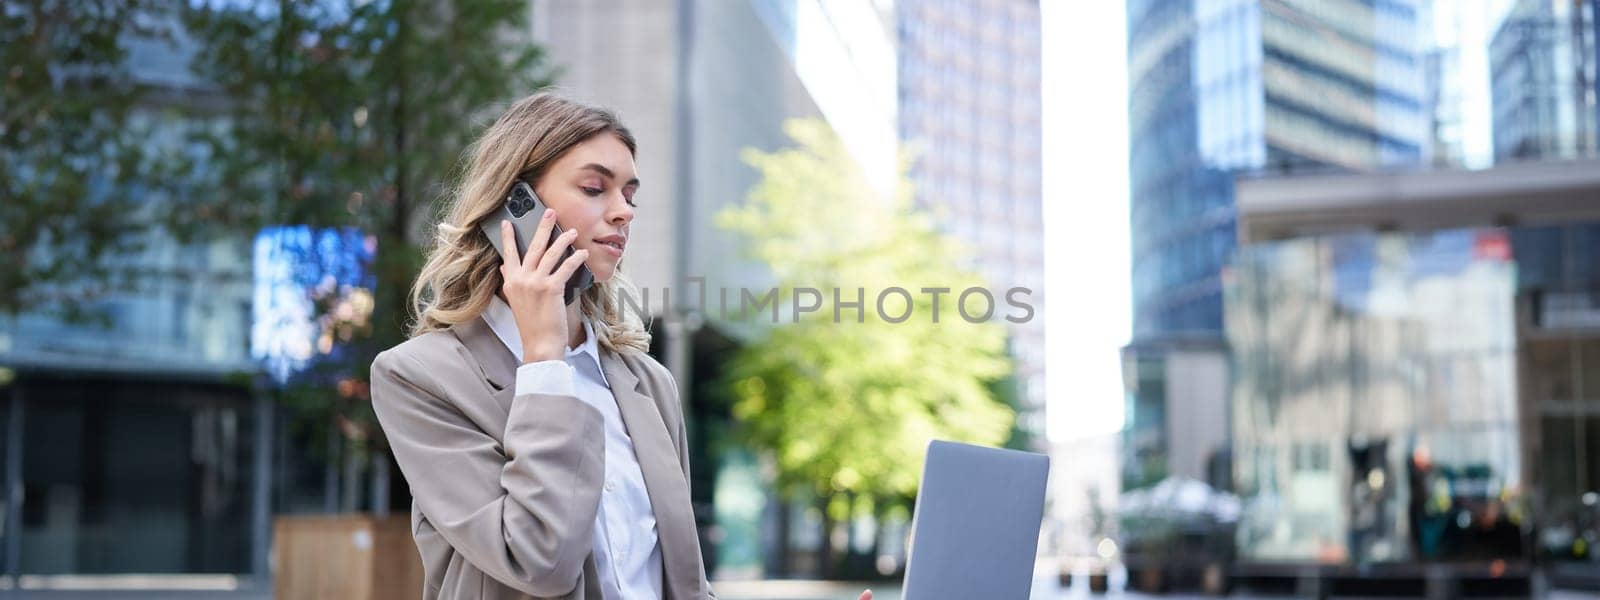 Businesswoman checking diagram and work on laptop, calling someone on mobile phone, sitting outdoors in city centre.